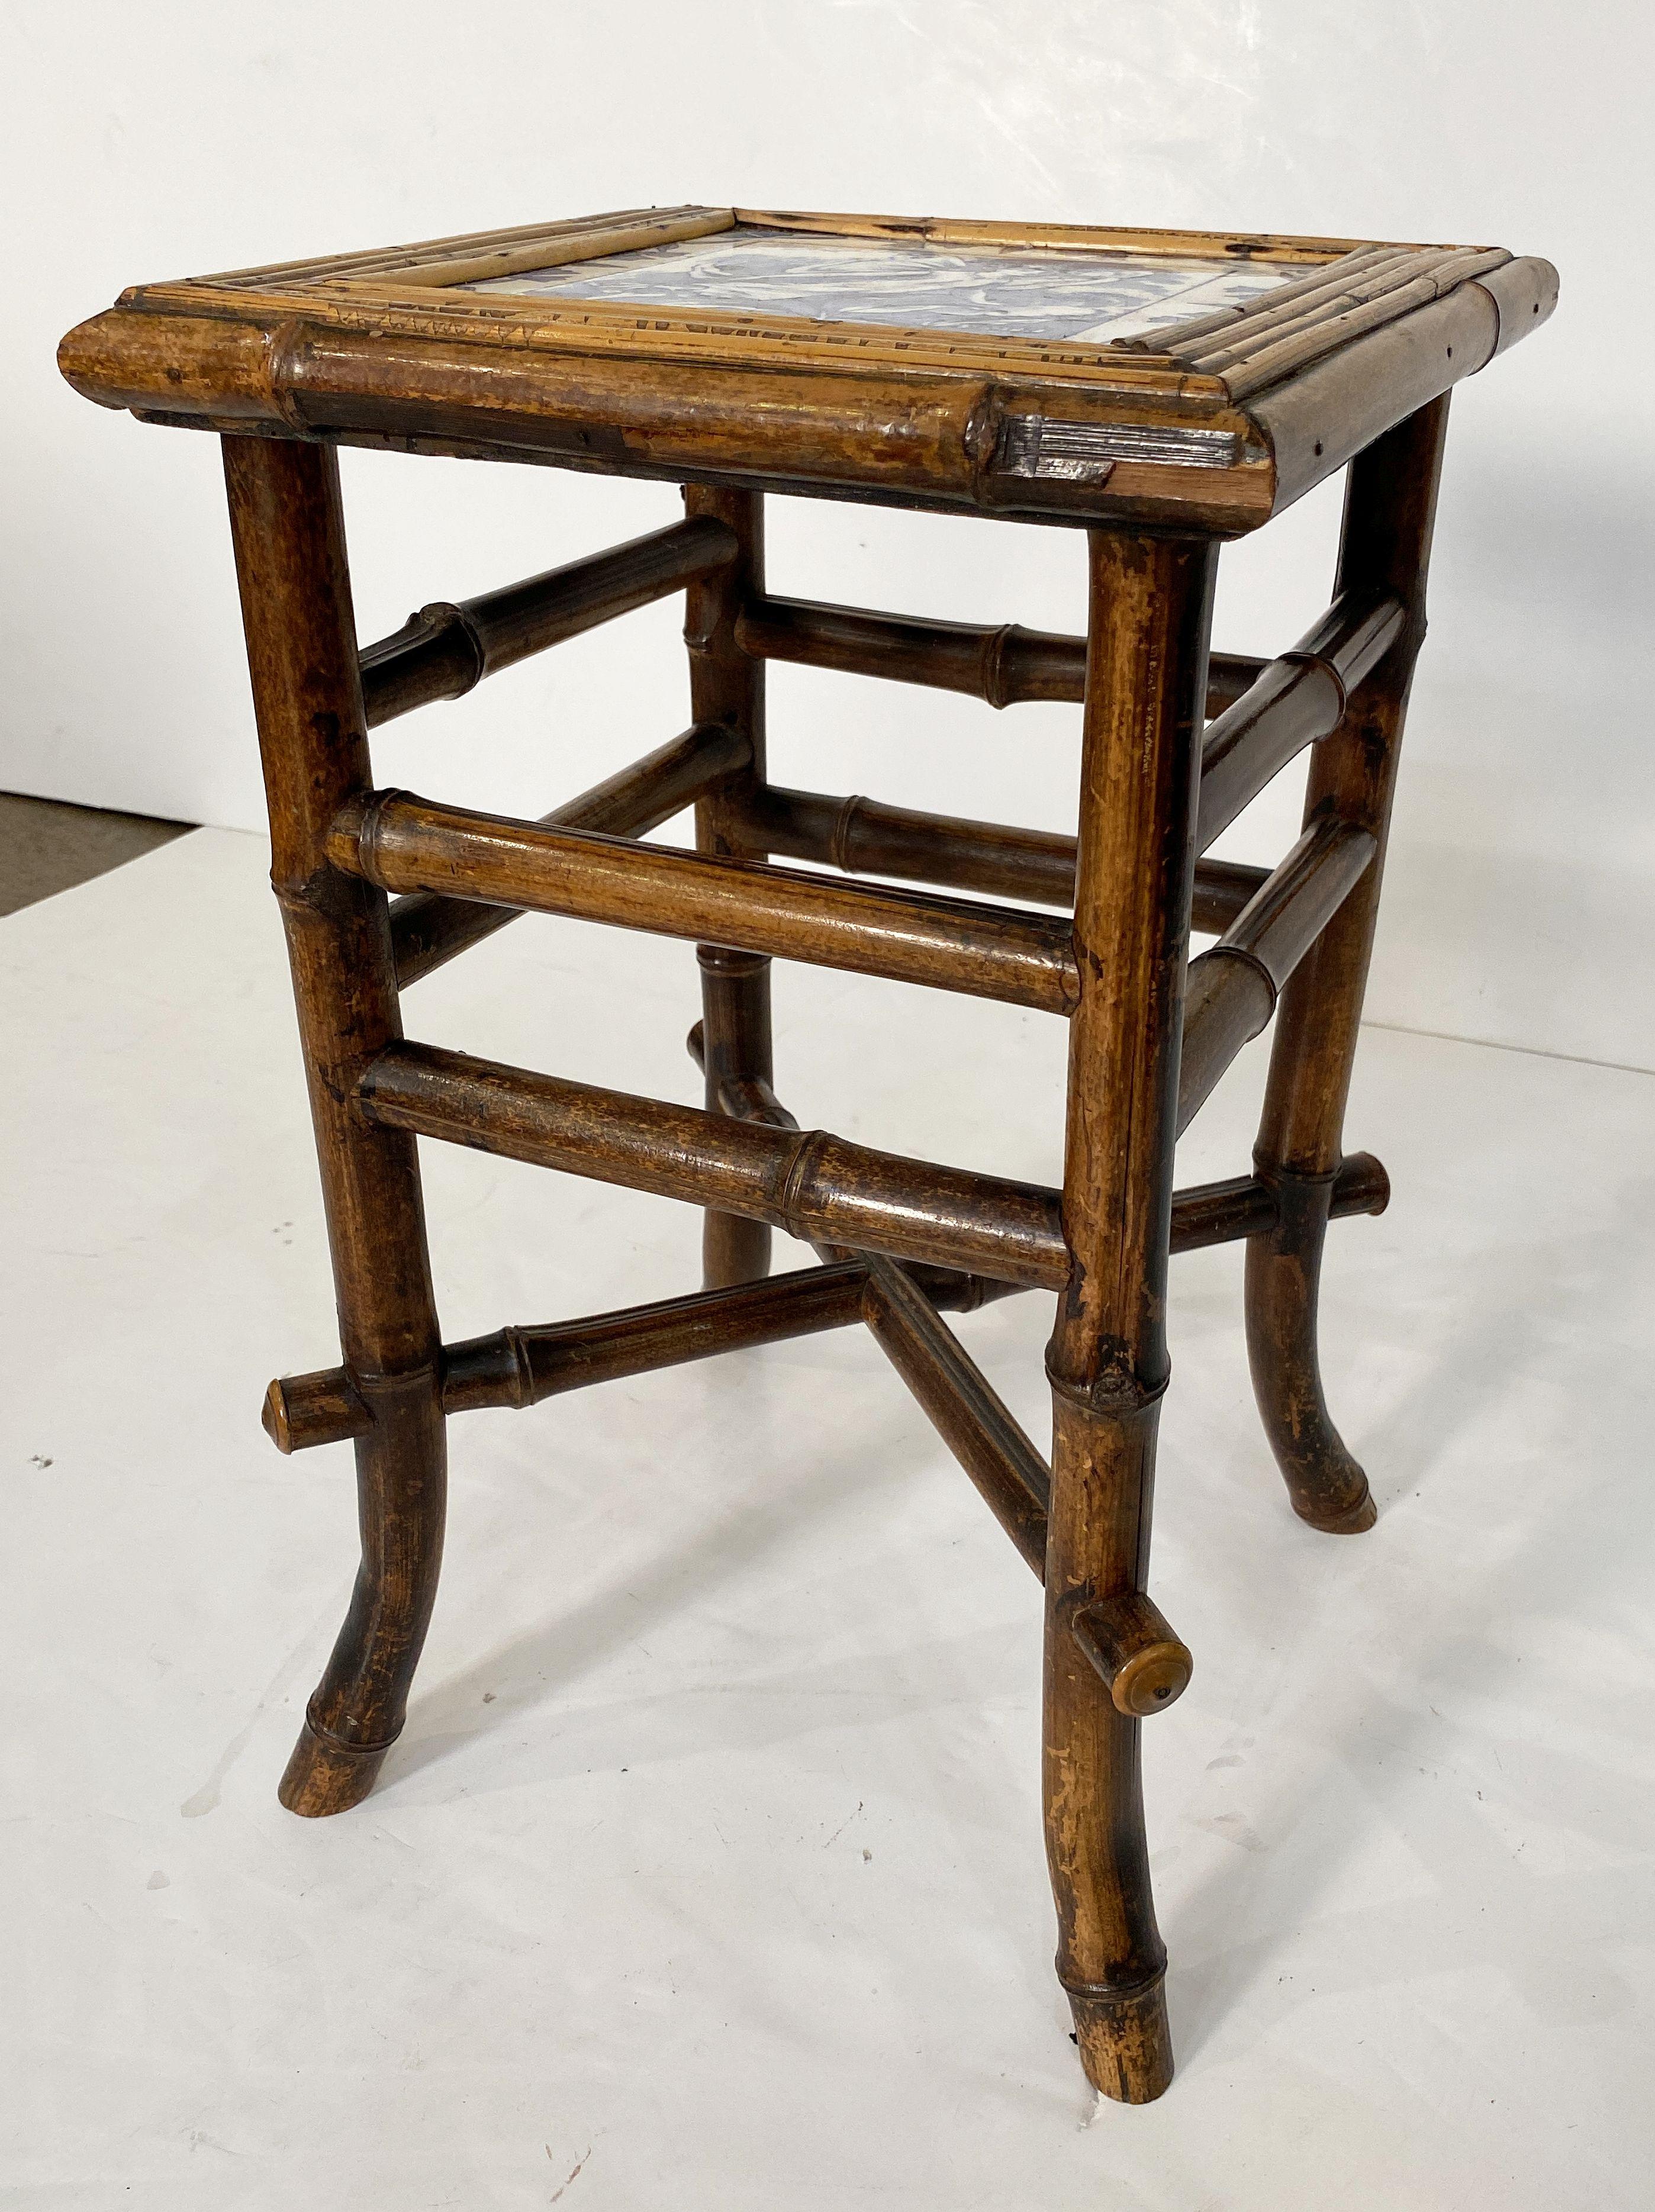 English Bamboo Table or Stool with Tile Seat from the Aesthetic Movement Era For Sale 6